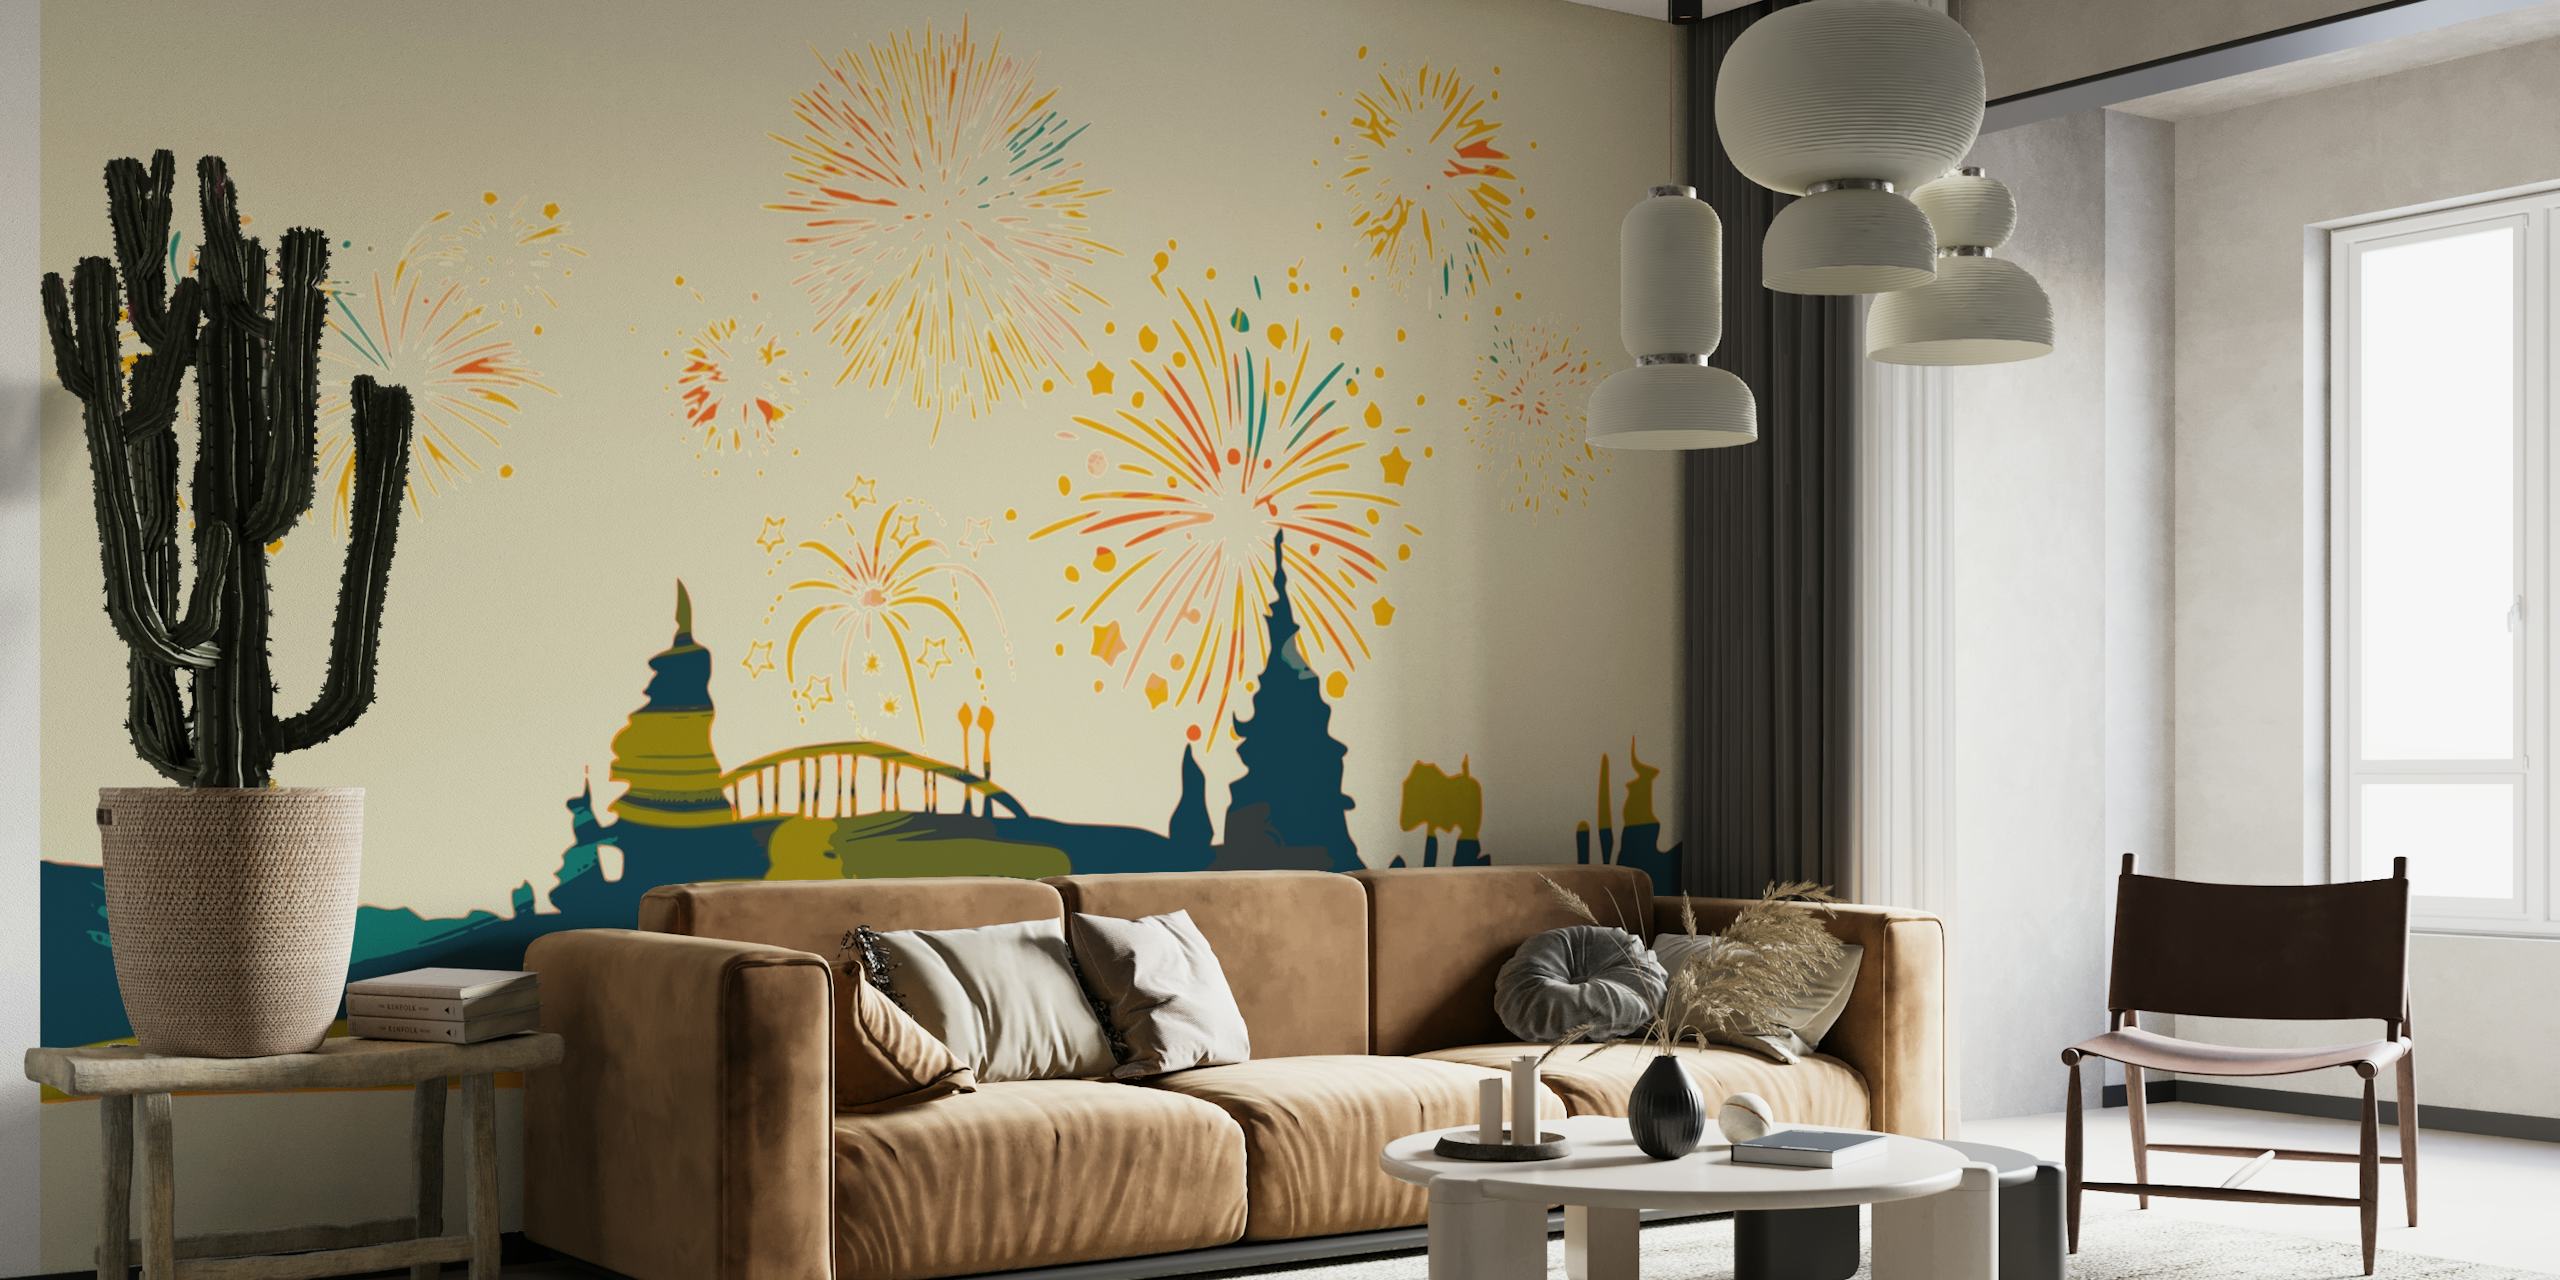 Abstract colorful skyline wall mural with cityscape and fireworks design